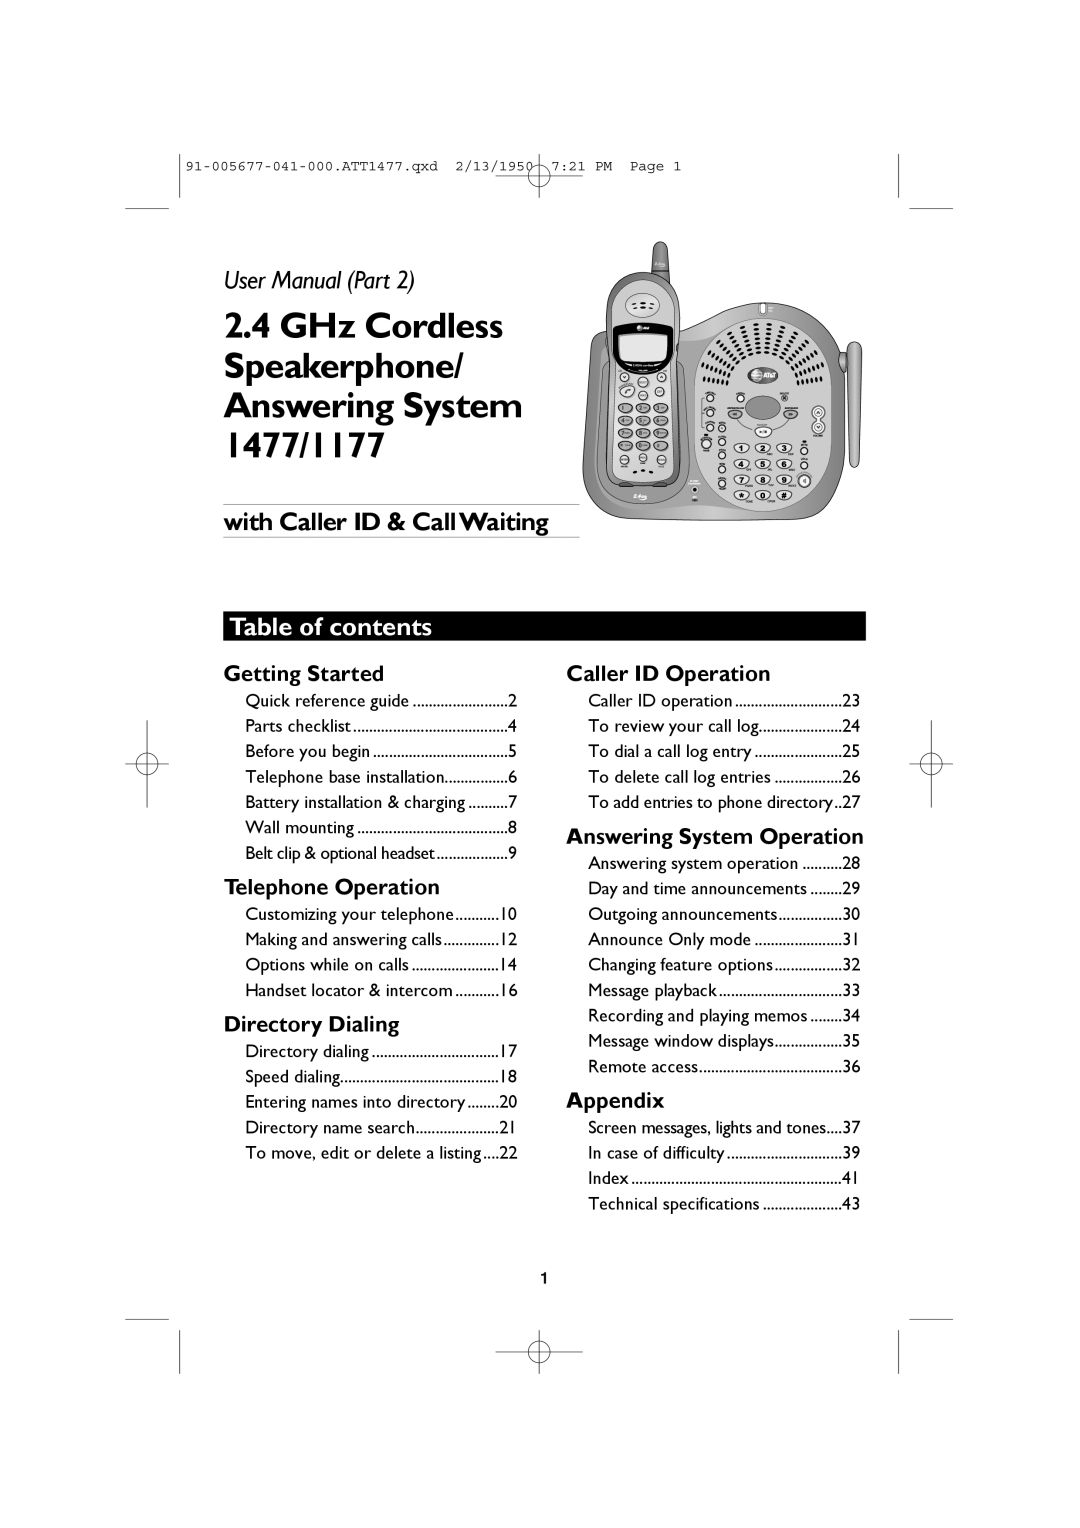 AT&T Table of contents, GHz Cordless Speakerphone/ Answering System 1477/1177, with Caller ID & CallWaiting, Appendix 